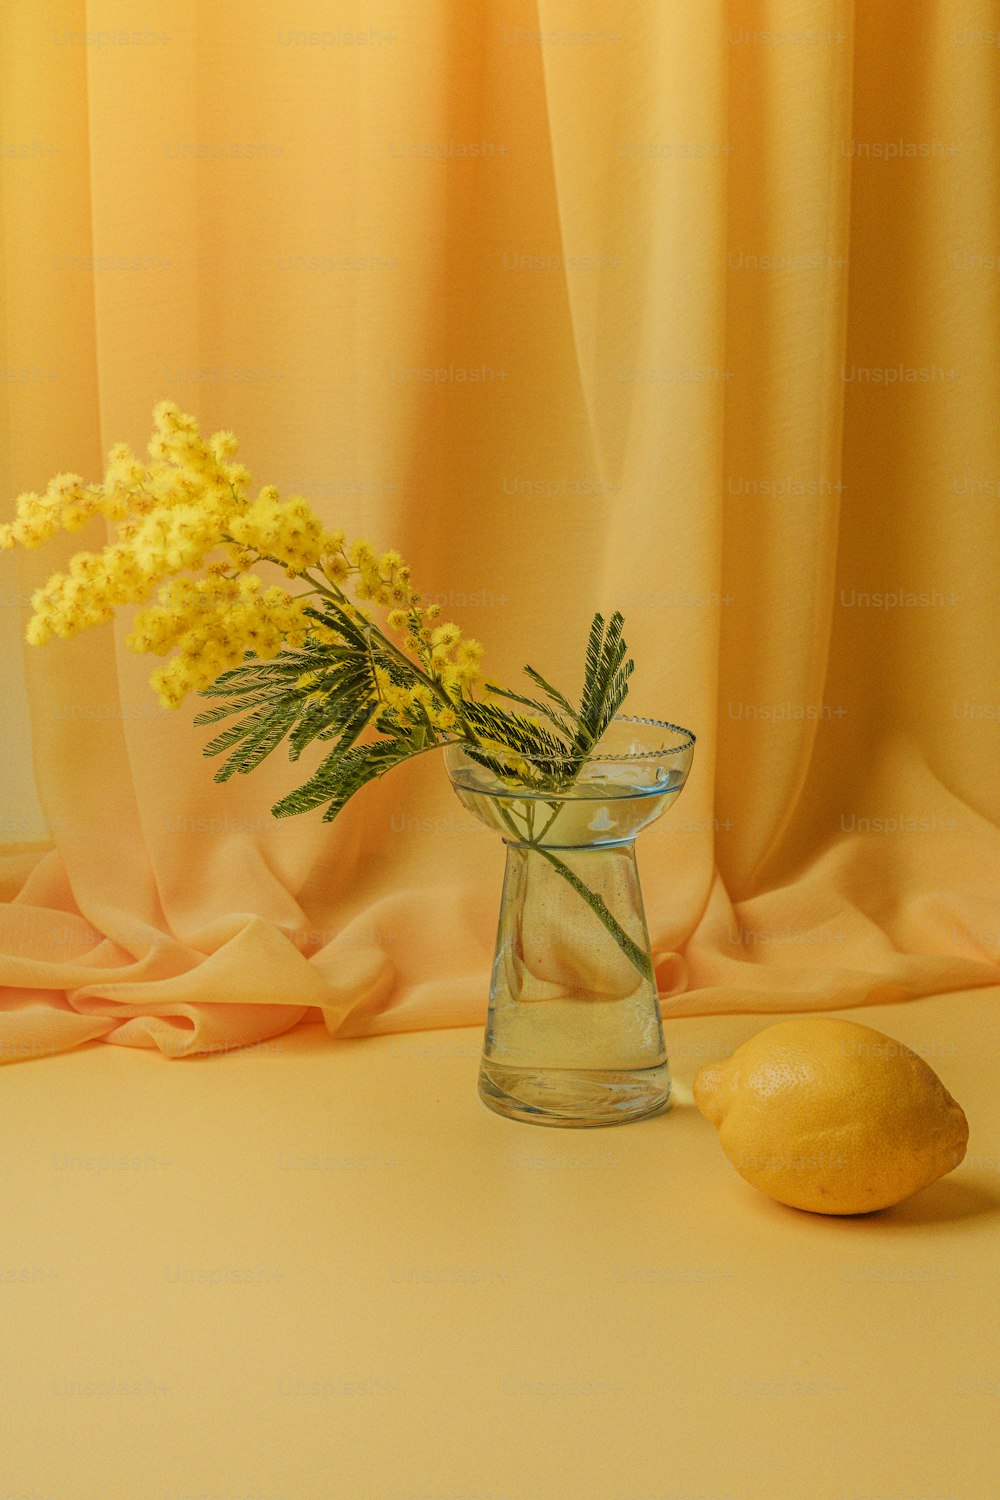 a glass vase with flowers and a lemon on a table